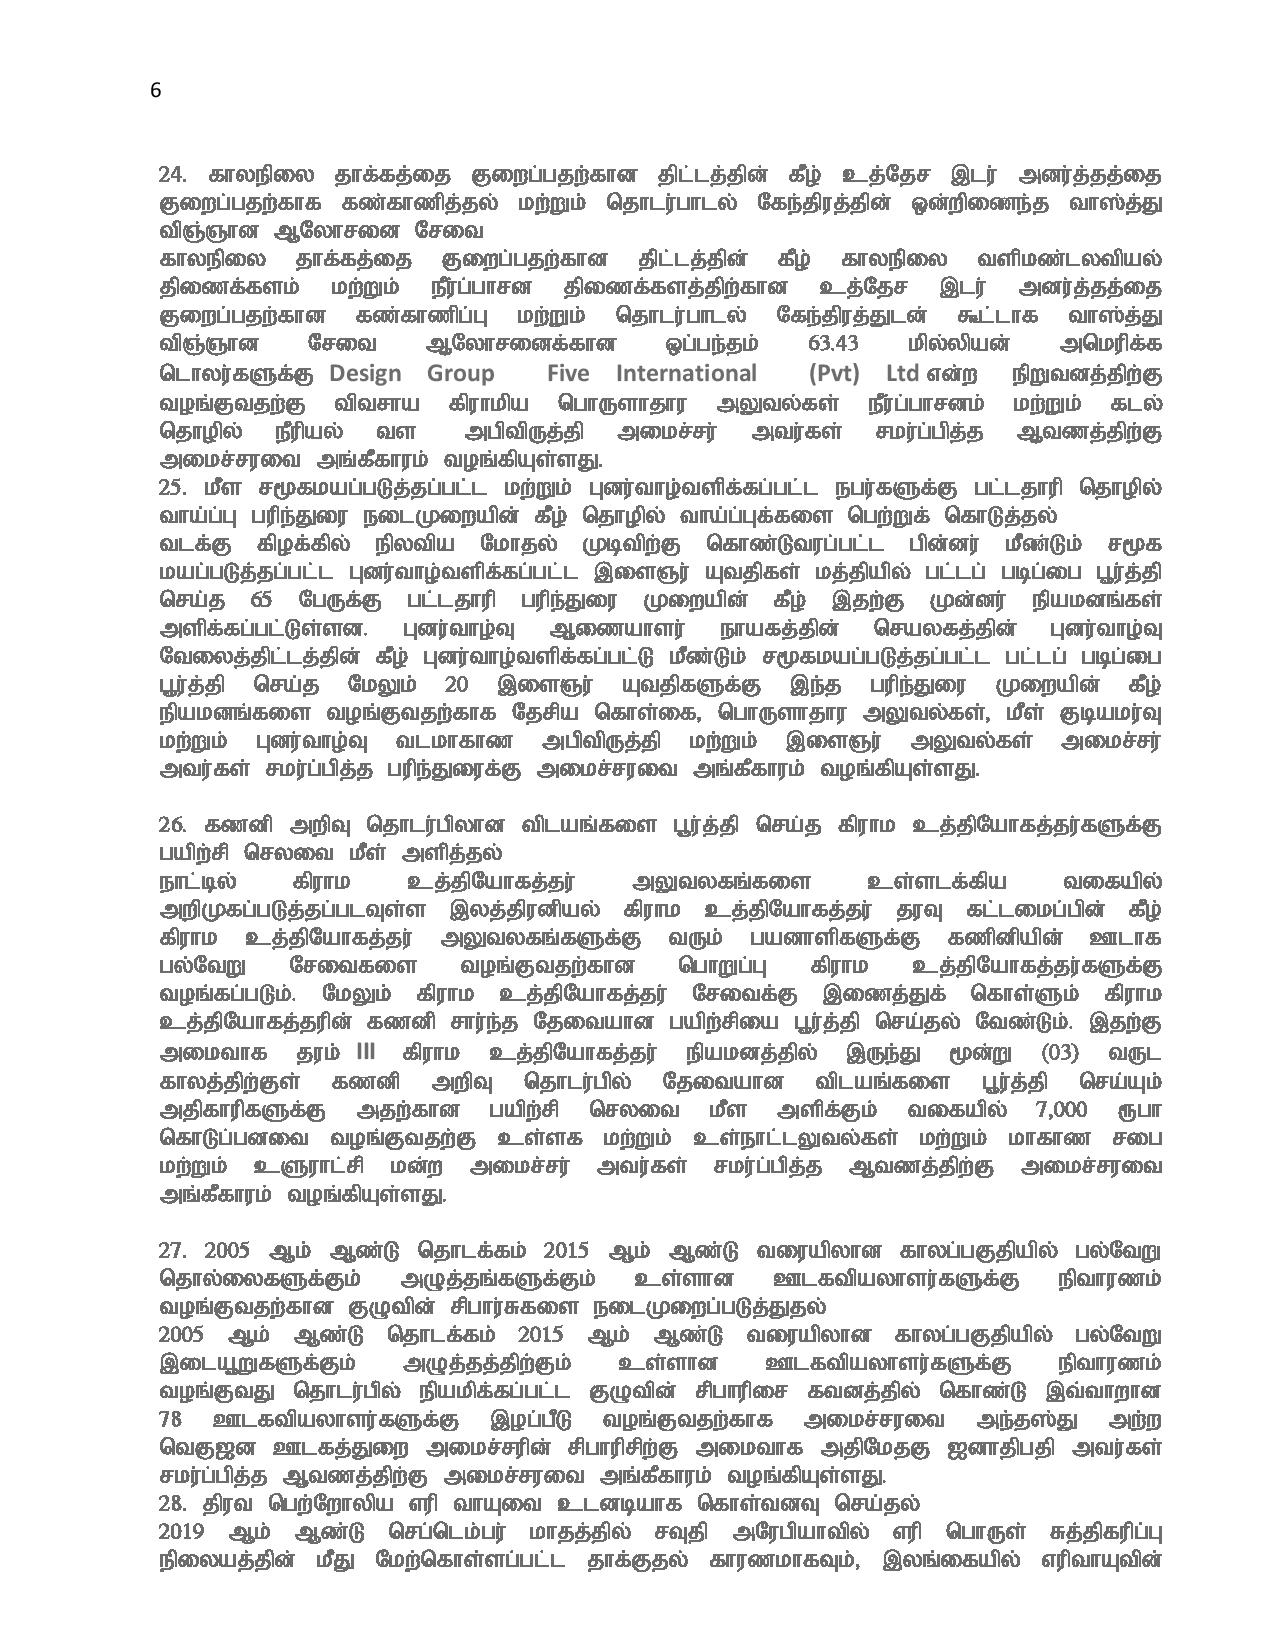 Cabinet Decisions on 05.11.2019 Tamil page 006